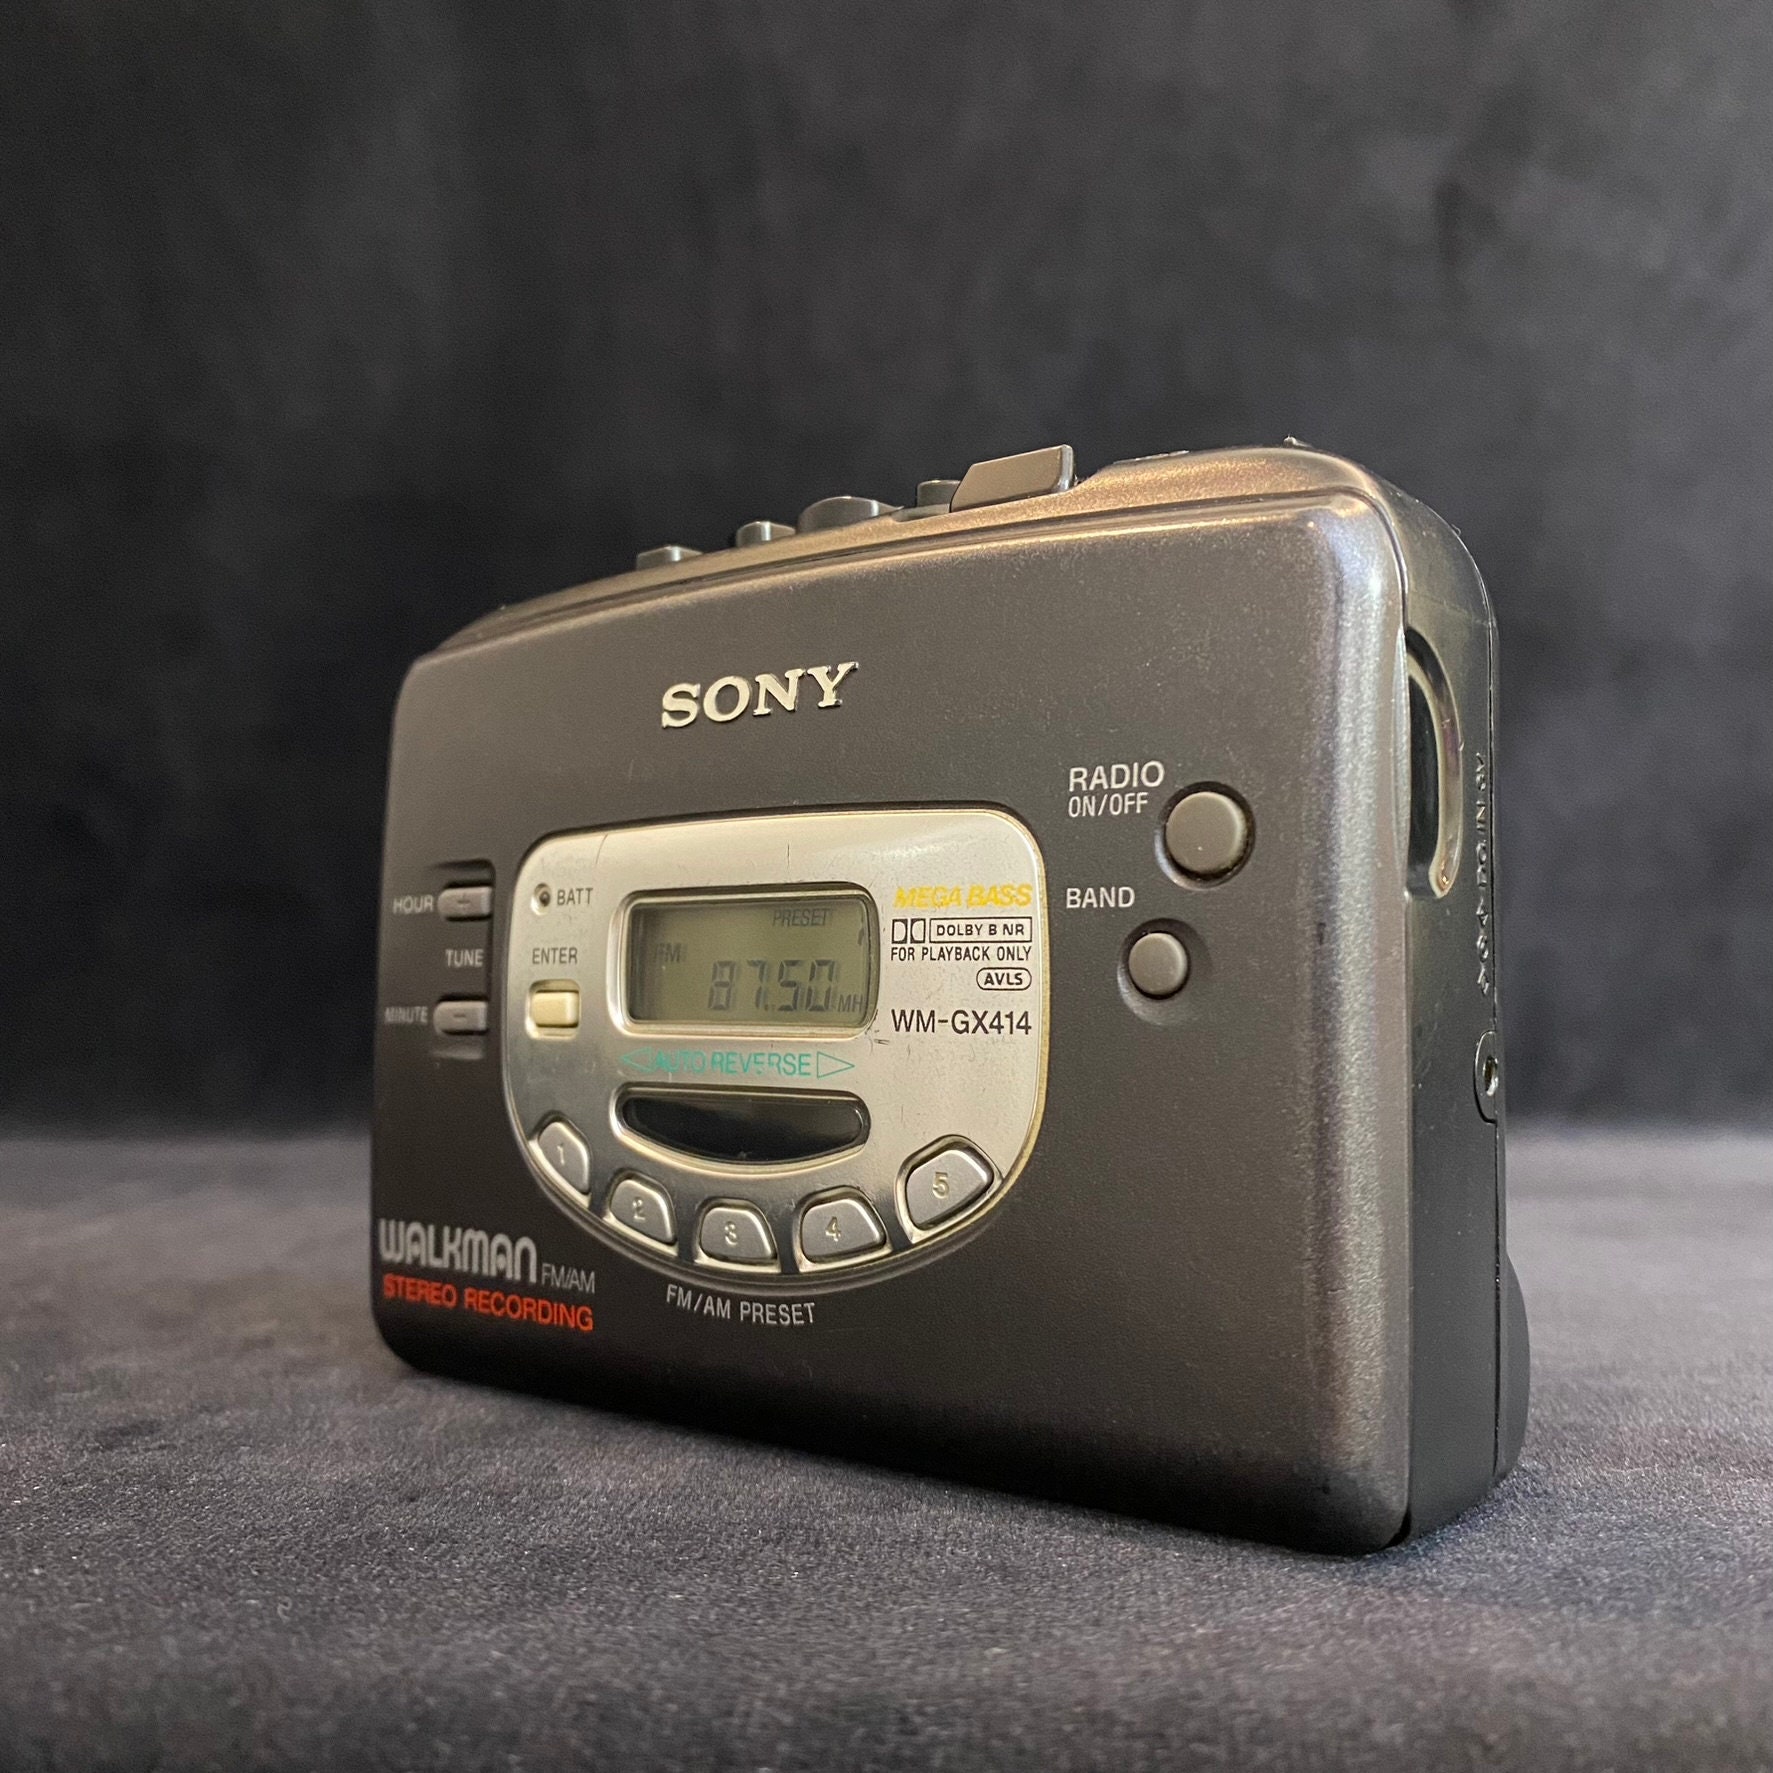 Vintage Sony Walkman Sports Cassette Player Works Great, FM/AM Band Radio,  Rare and Collectible Model, Fully Working -  Finland